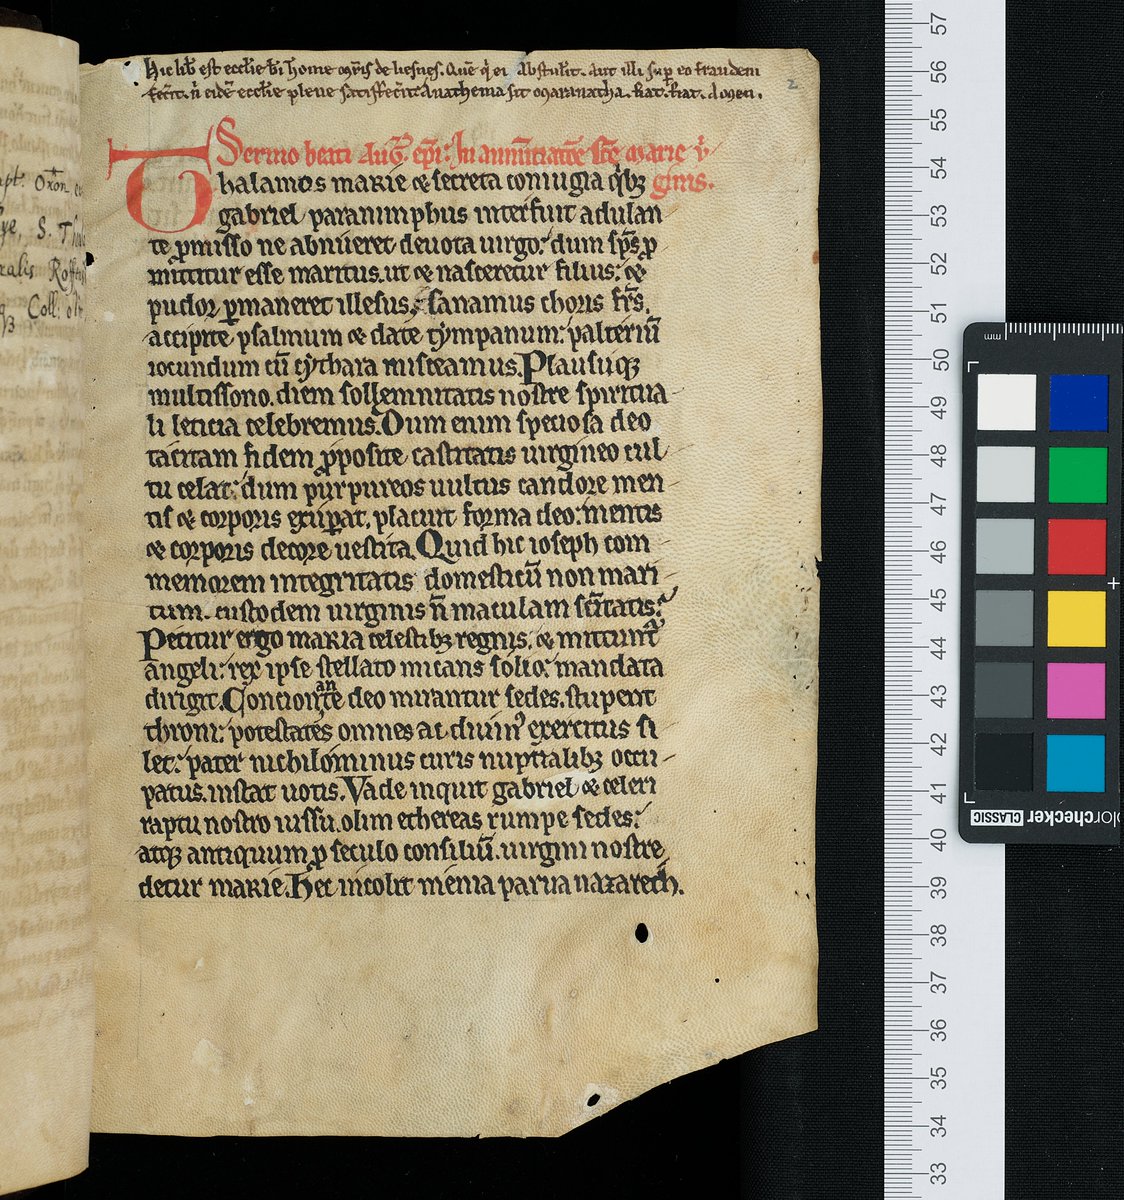 Several of our Western medieval manuscripts will be coming to Digital Bodleian soon, including MS 134, a collection of sermons mainly by Geoffrey of St Thierry. You can see what's already available by visiting our page on Digital Bodleian: digital.bodleian.ox.ac.uk/partners/st-jo…